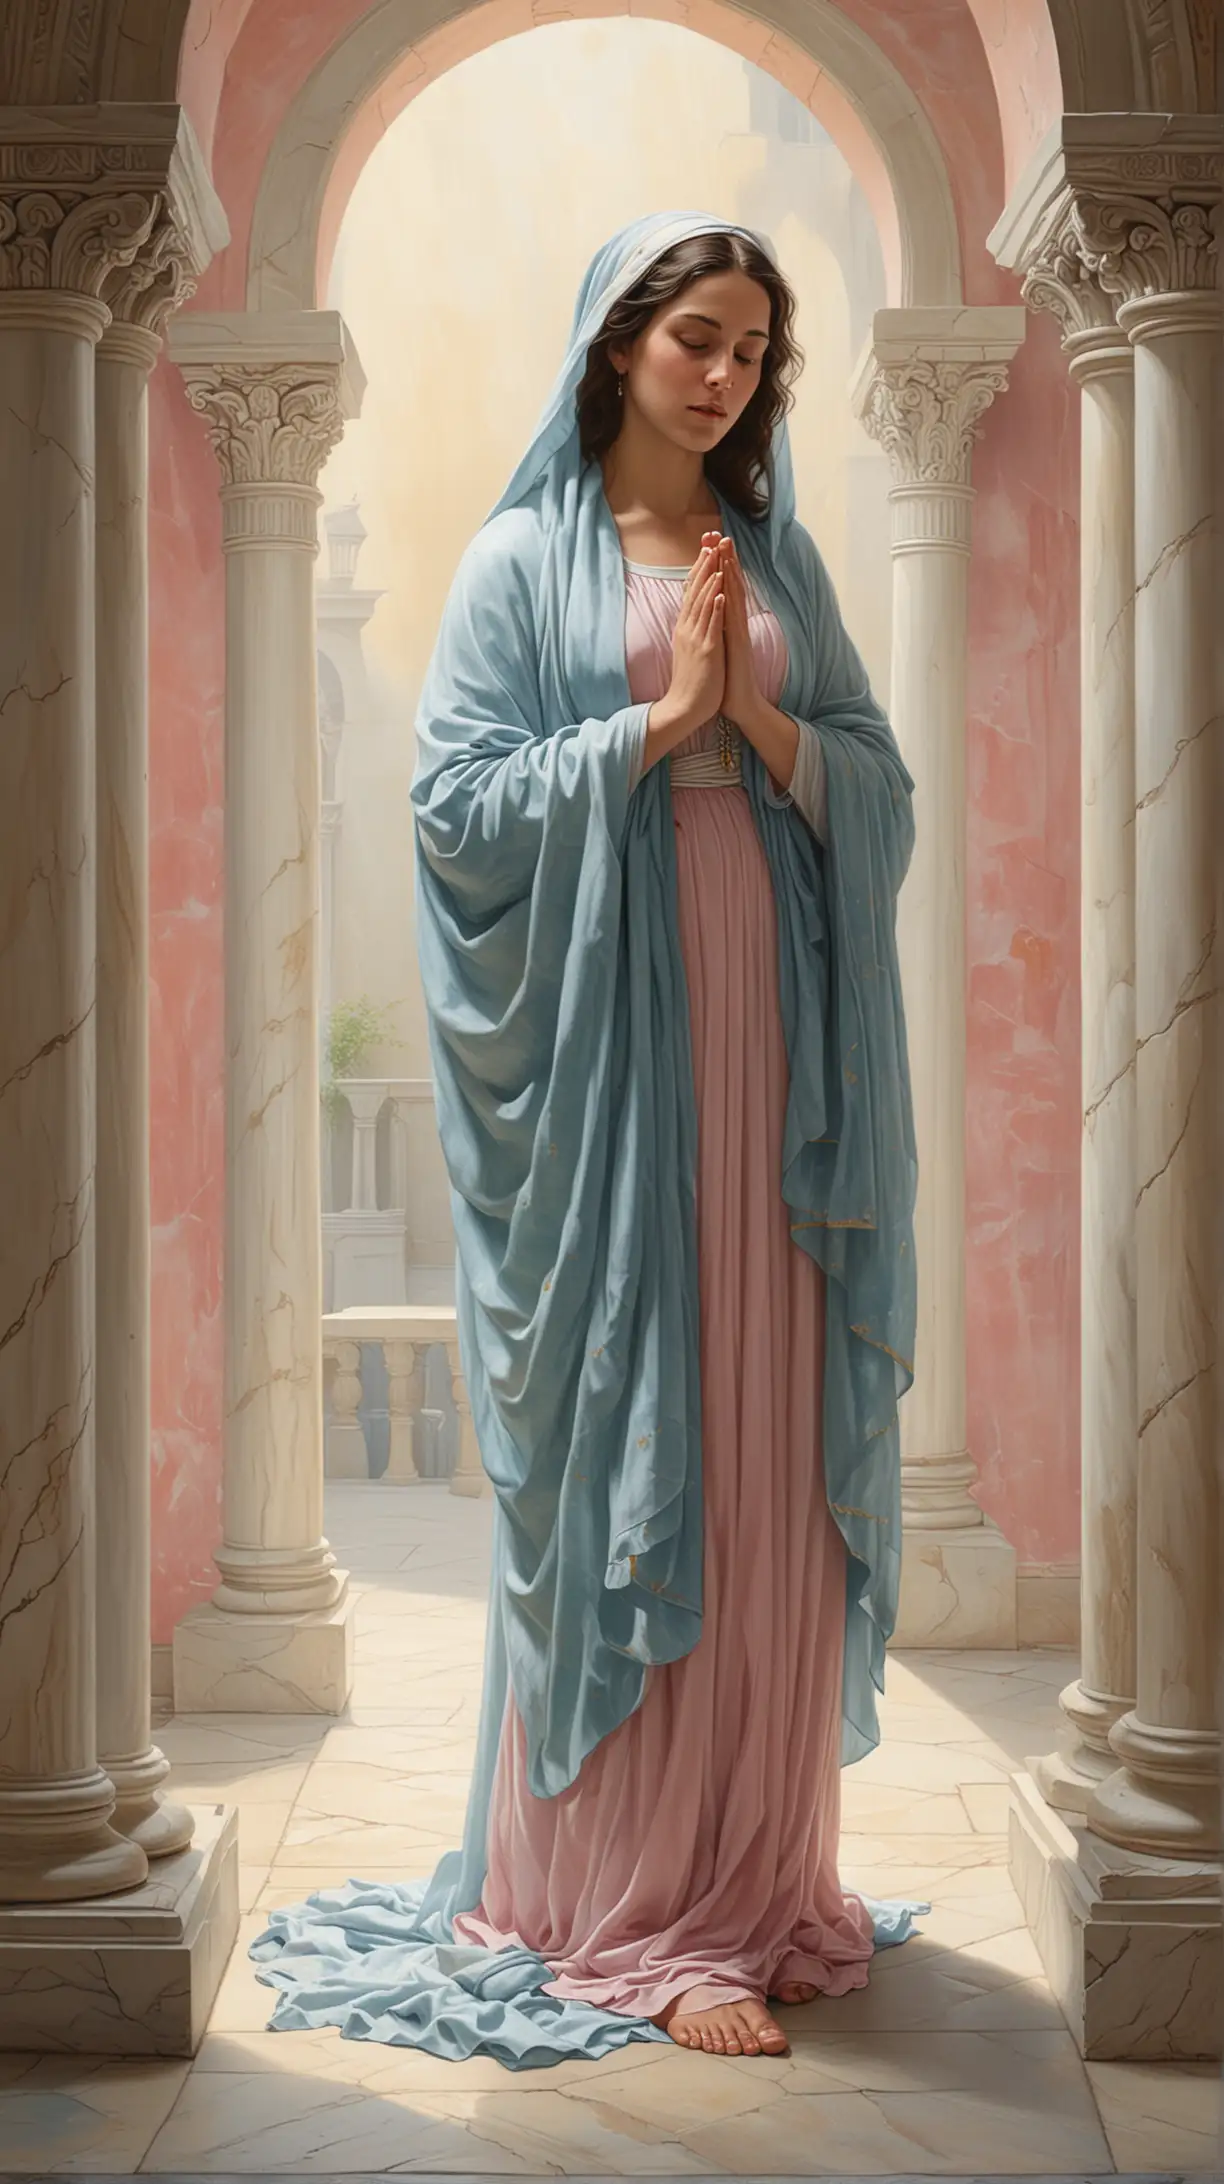 The painting depicts The virgin Mary. The scene is set within the temple, suggested by the arched stone doorway and the polished marble walls and columns.

Central Figure

The Virgin Mary: We are seeing the left-side-view of the Virgin Mary is a very pretty eighteen year-old girl with long black wavy hair wearing a blue mantle over a pink dress, standing wearing sandals. She holds her hands clasped together over hear breast in the act of prayer.

Additional Details: 
Lighting: Light is from the upper right.
The Temple Setting: The temple walls and columns are in polished white marble.  The background features a curtain. The cold tones of the painting and the play of light and shadow create a sense of solemnity and reverence.
Symbolism:  The white veil symbolizes purification.
Overall Impression:

The painting captures the emotional intensity and spiritual significance of the subject The expression of the figure, the symbolism, and the setting all contribute to a powerful depiction of this pivotal event.